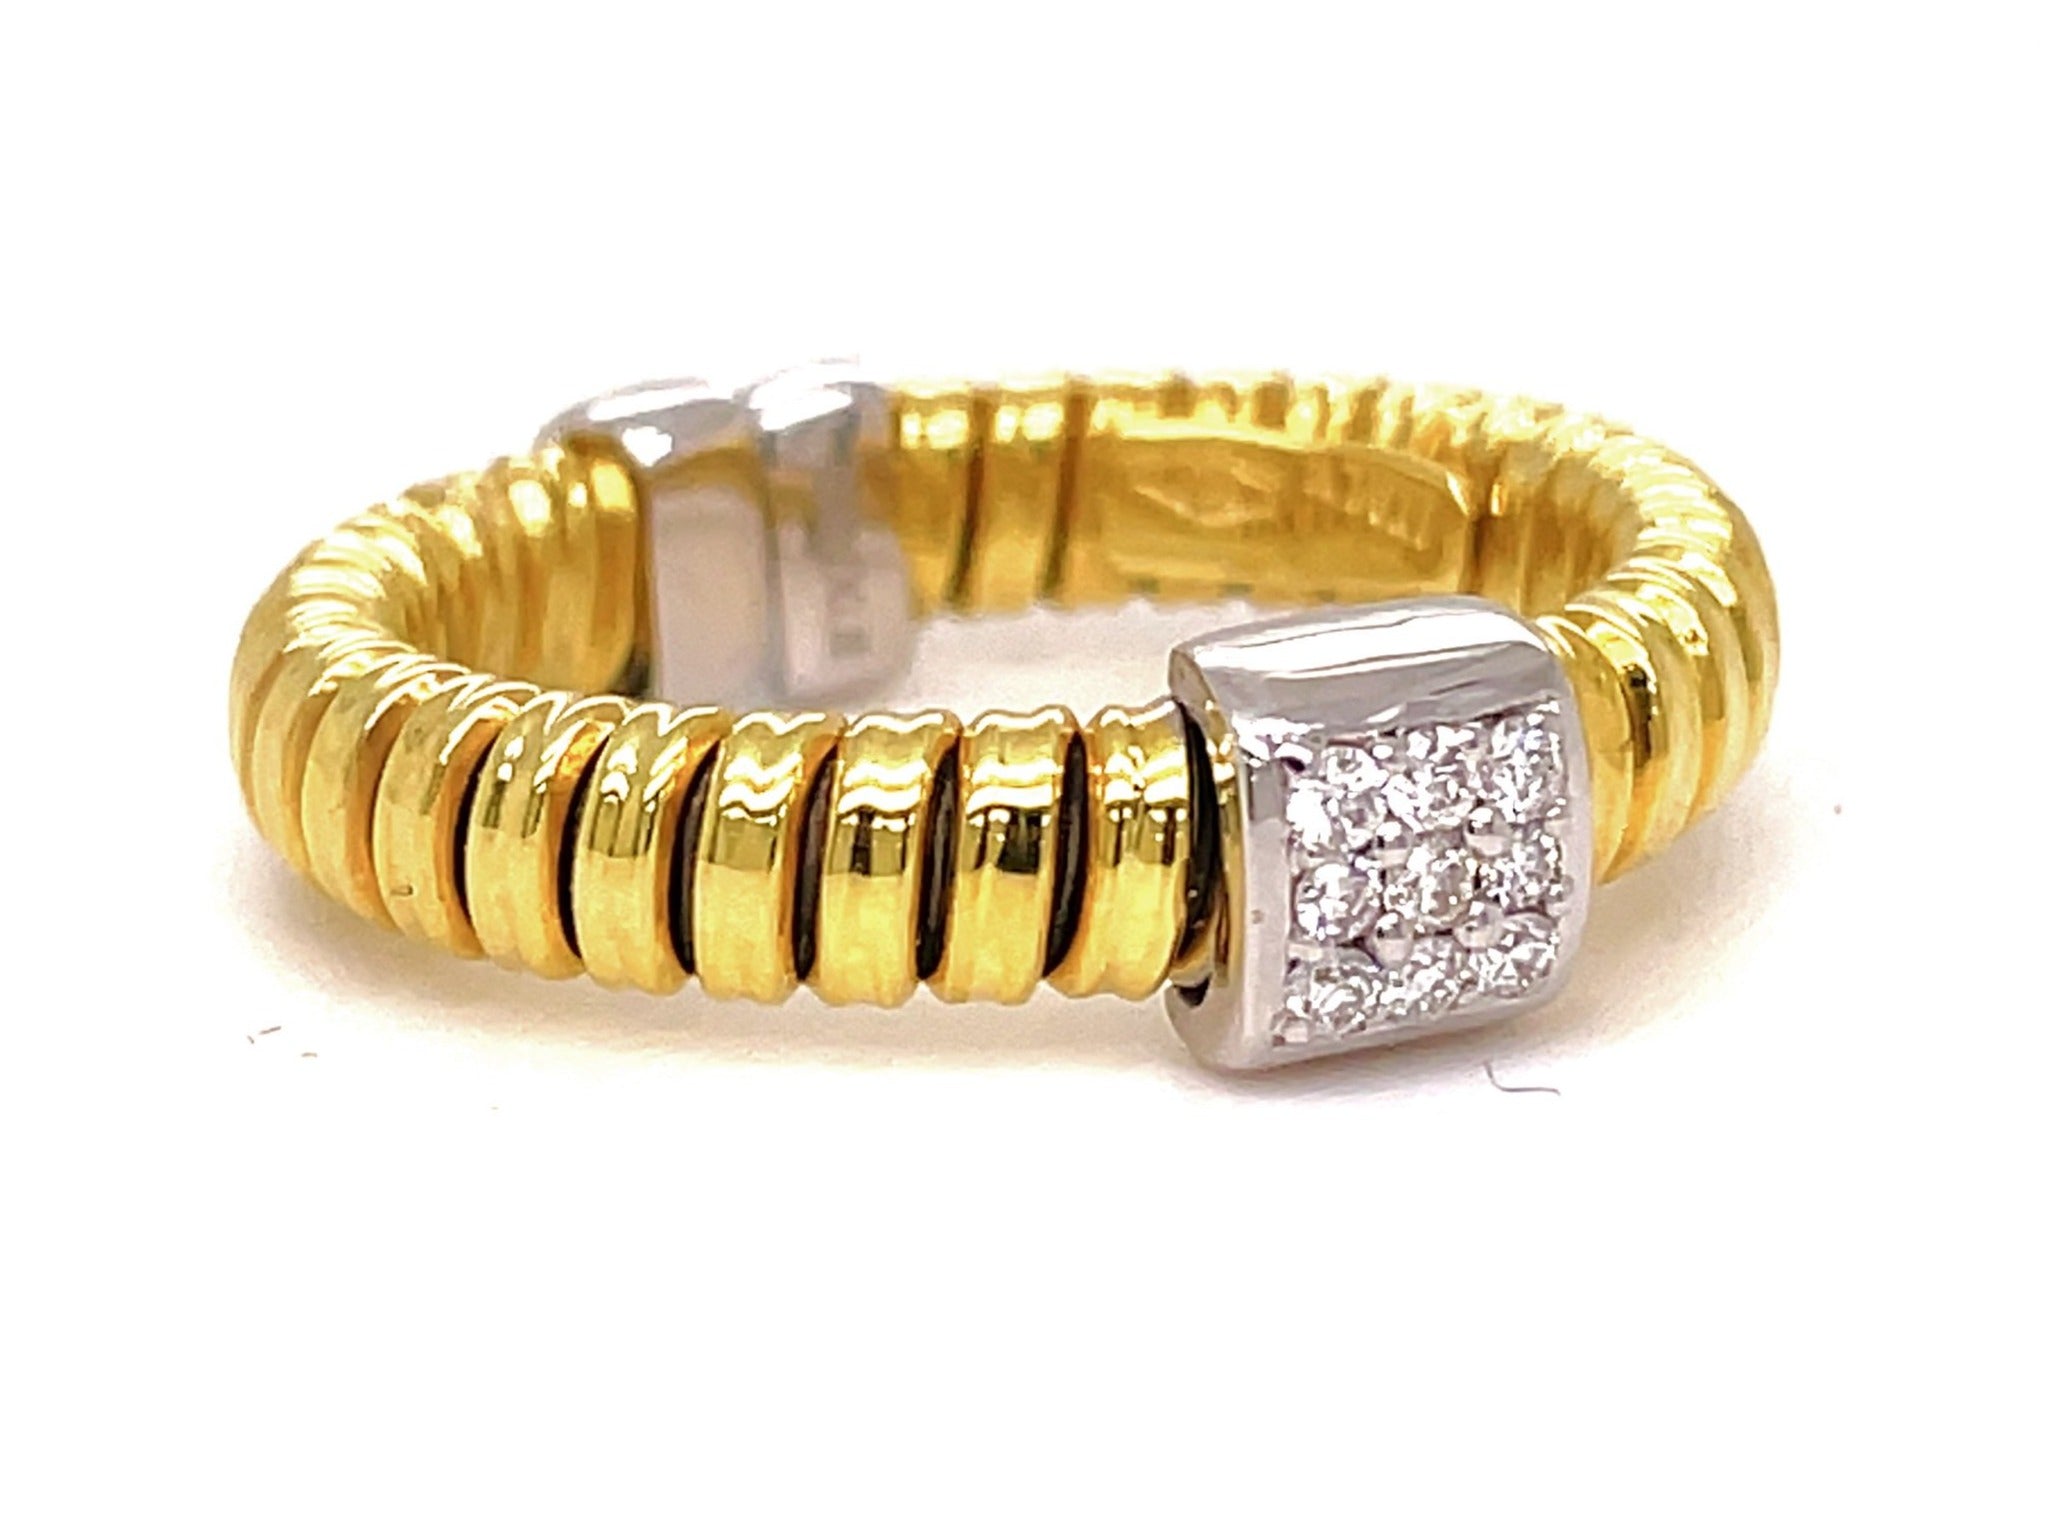 This 18k Italian Yellow Gold Diamond Square Motif Flexible Ring is crafted using an innovative tubogas technique that results in a flexible design. The 4.15mm width ring features a classic yet contemporary design, with 0.07cts of round diamonds. This ring is size 6.5, but can be resized.